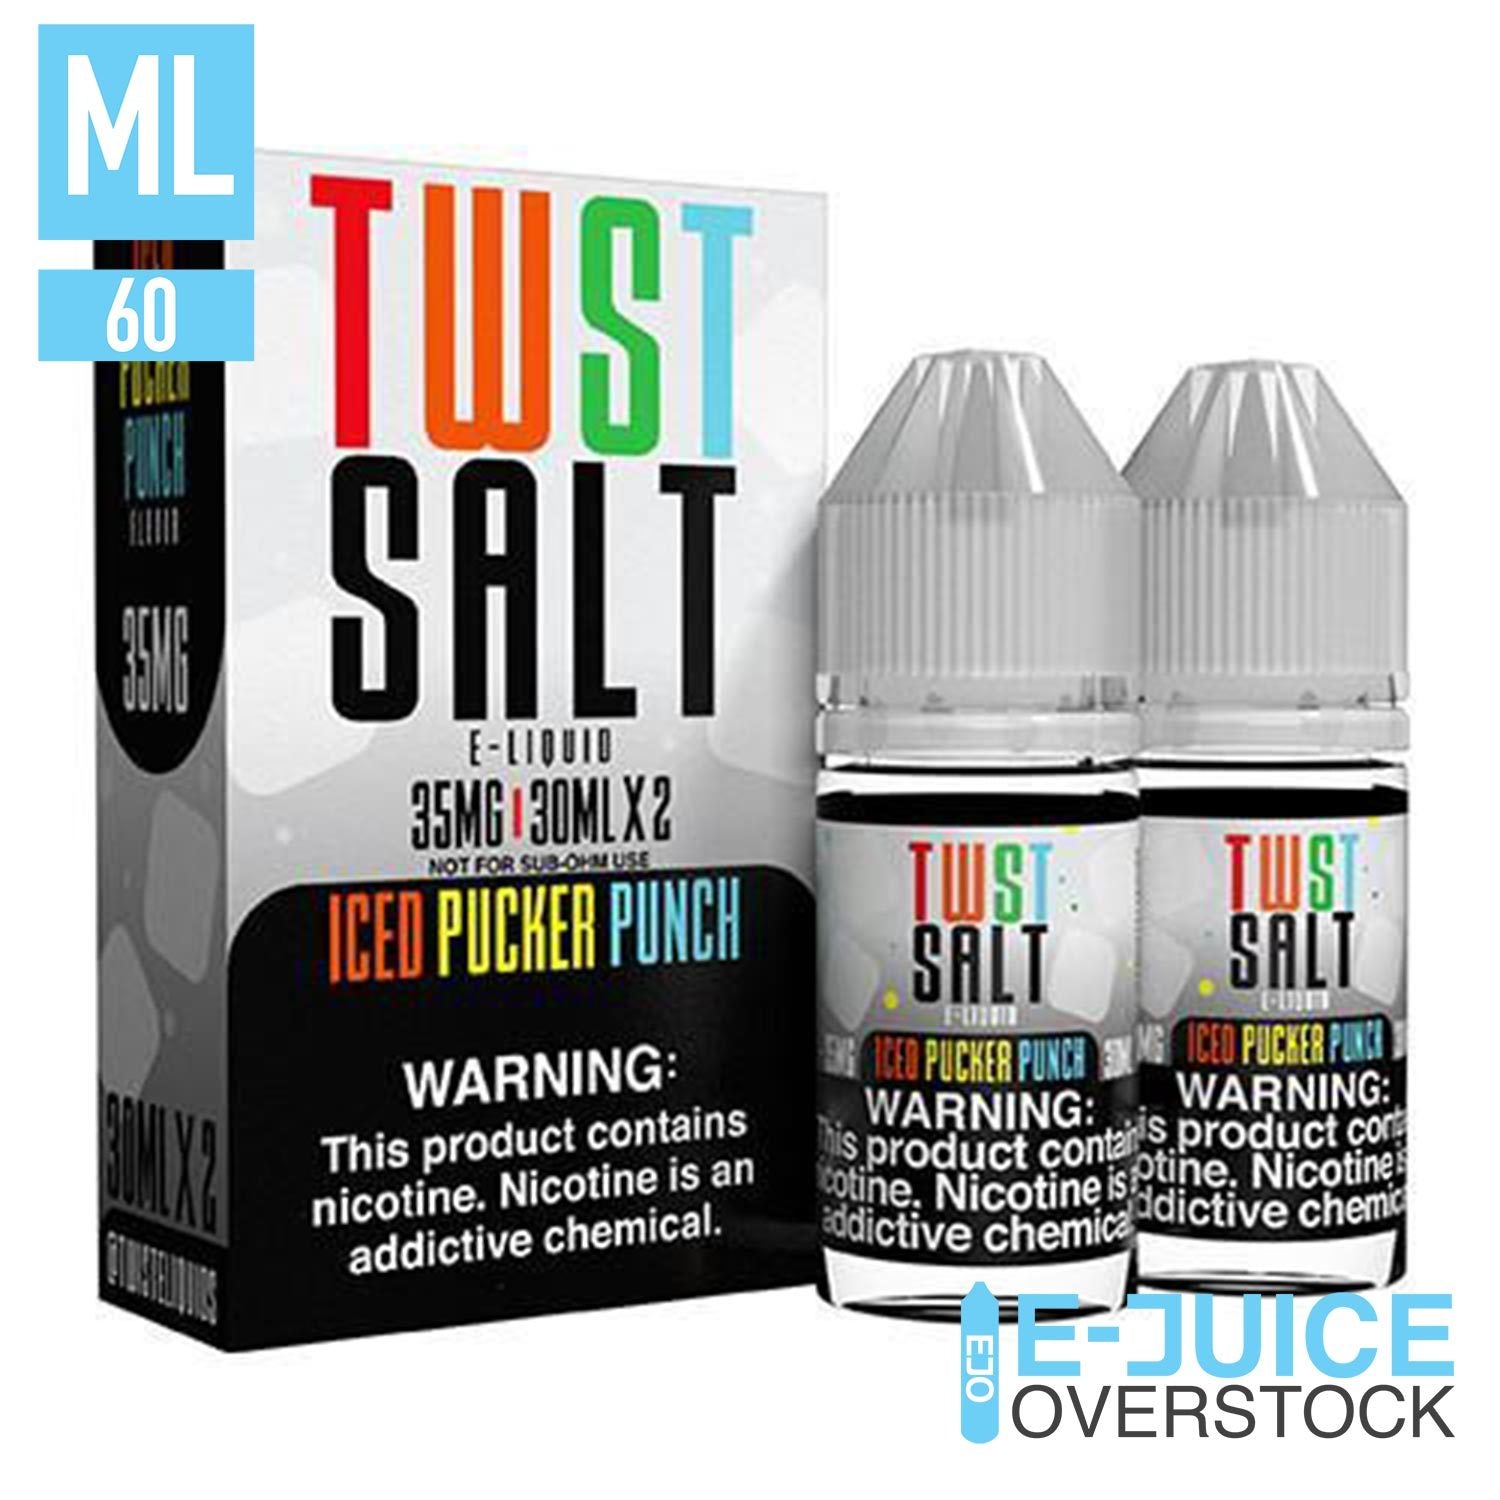 Iced Pucker Punch by TWST Salt 2x30ML SALTNIC - EJUICEOVERSTOCK.COM